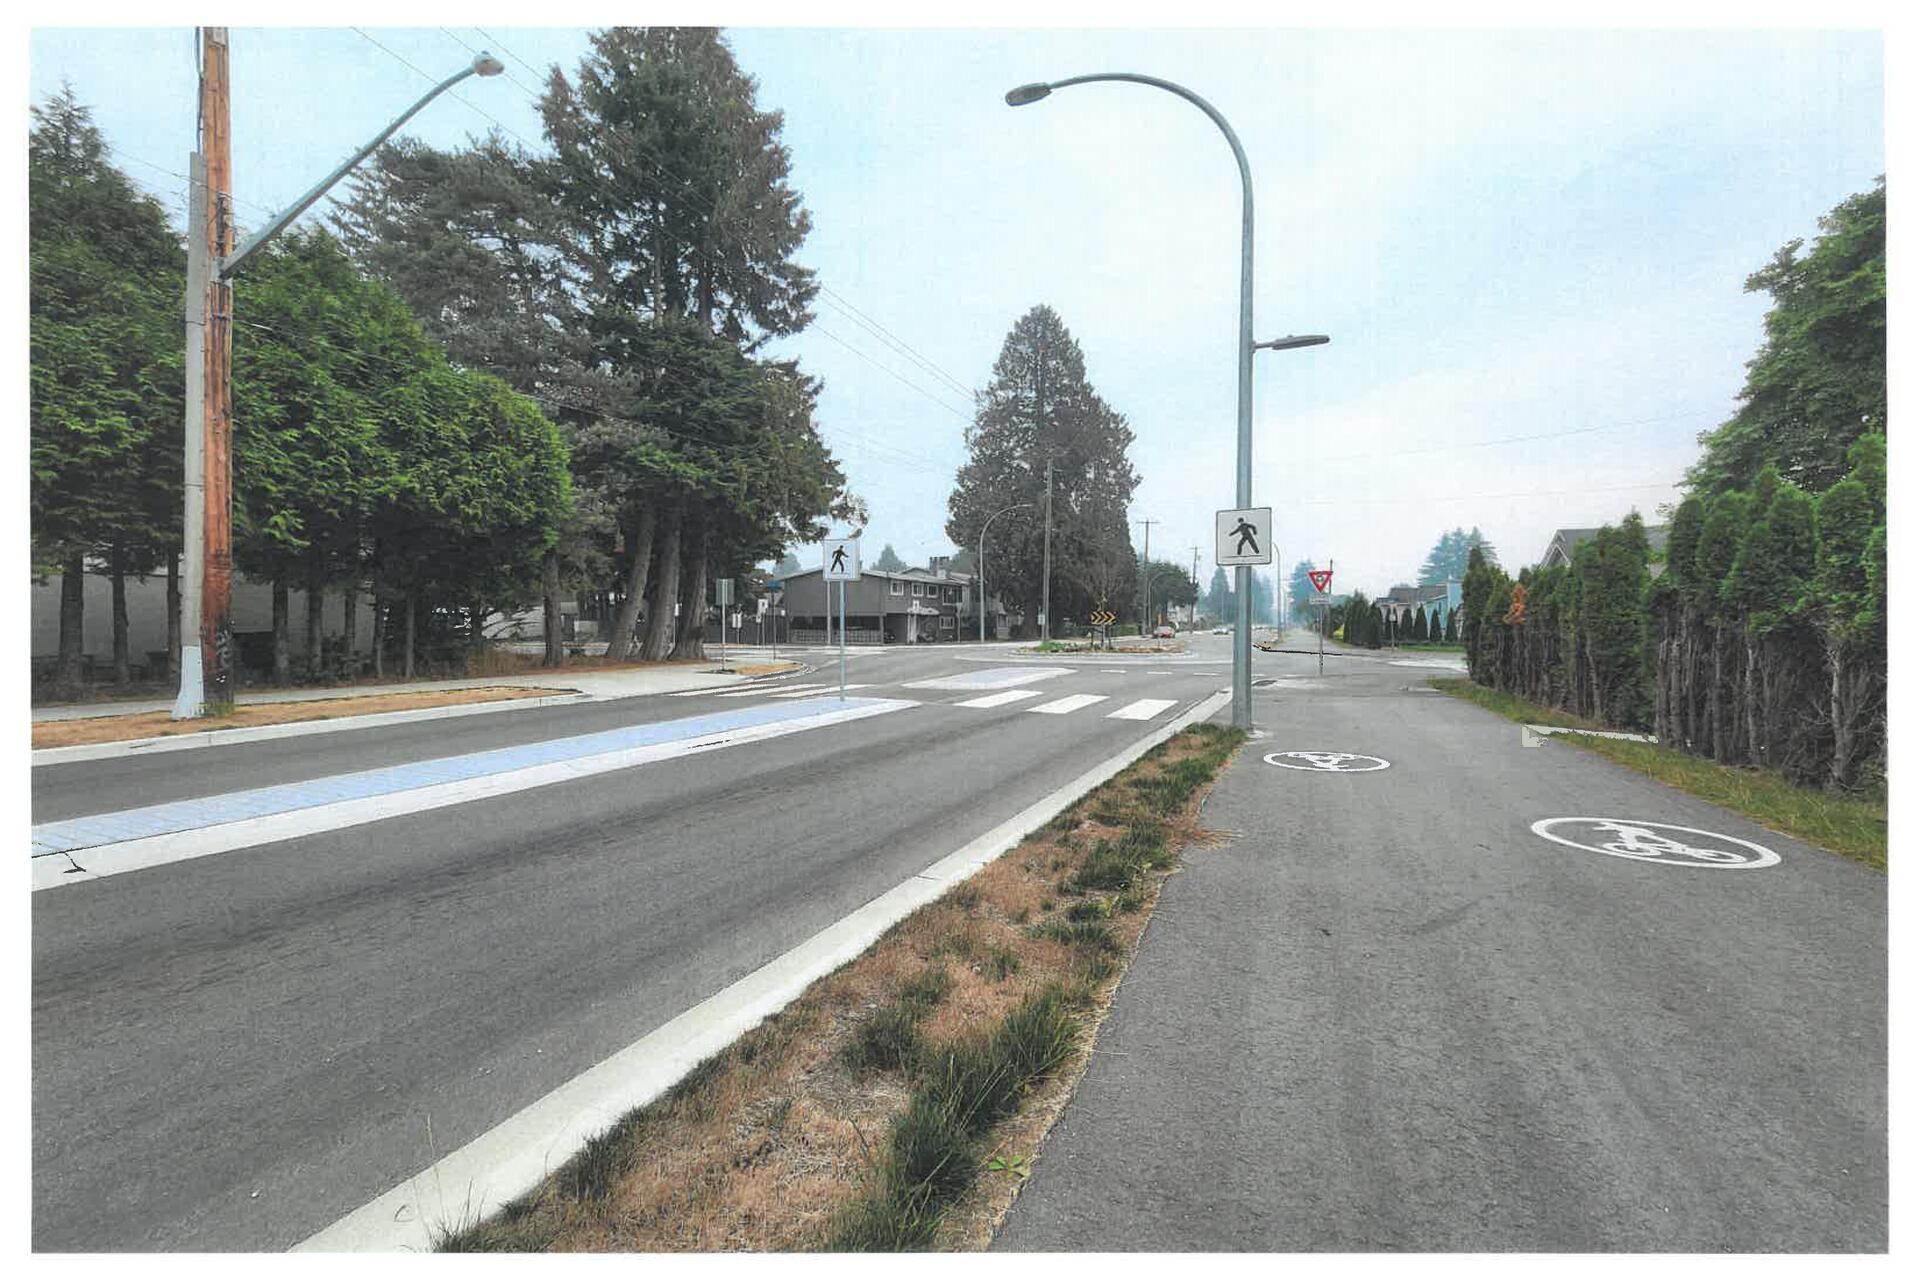 The Prarie Ave. Multi-Use Path in Port Coquitlam